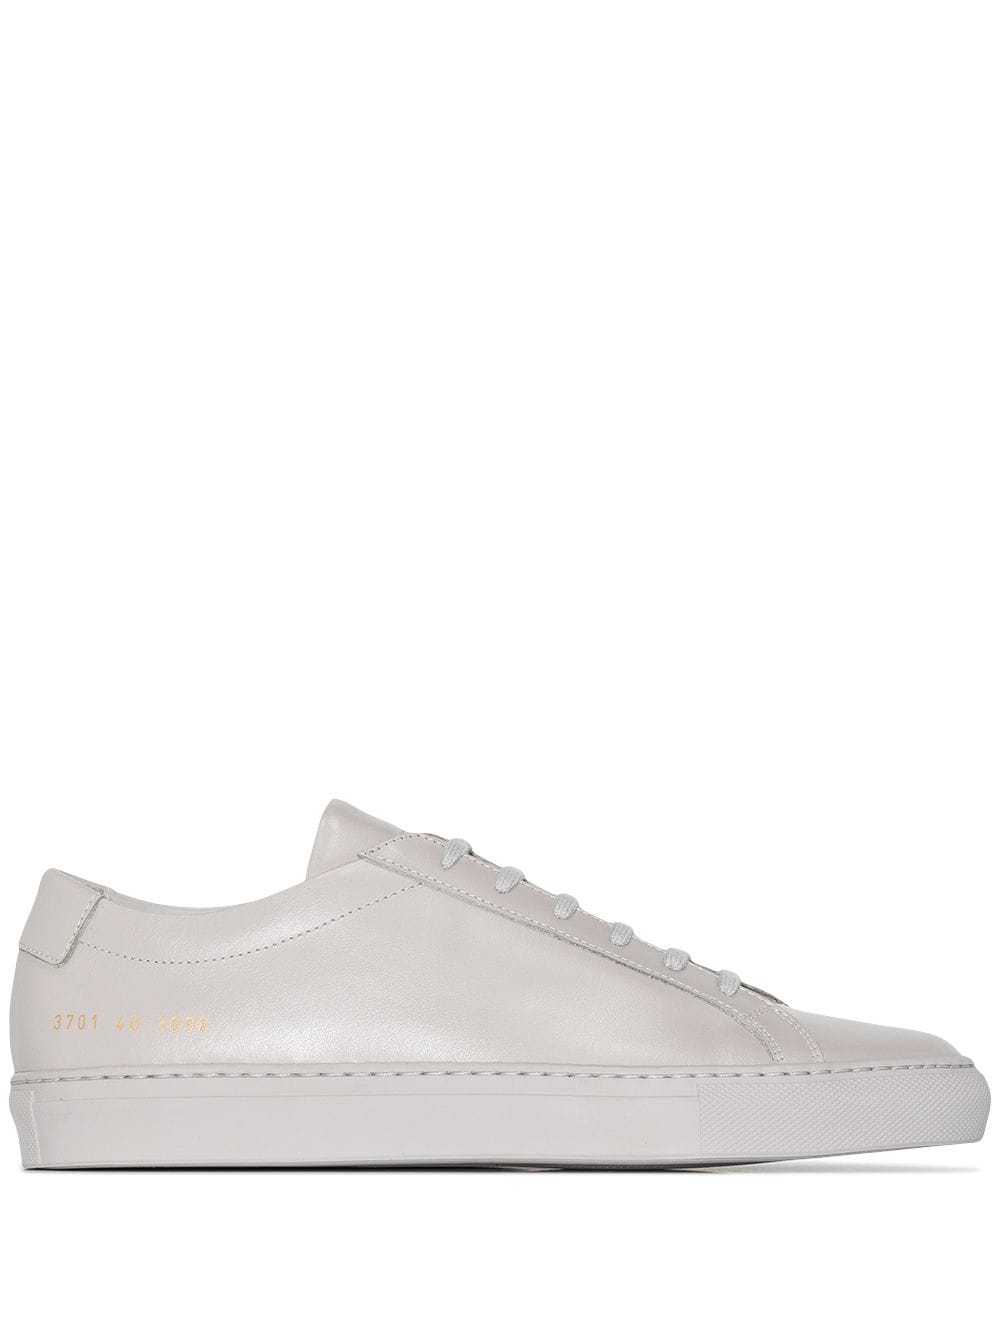 Common Projects Achilles low-top Sneakers - Farfetch